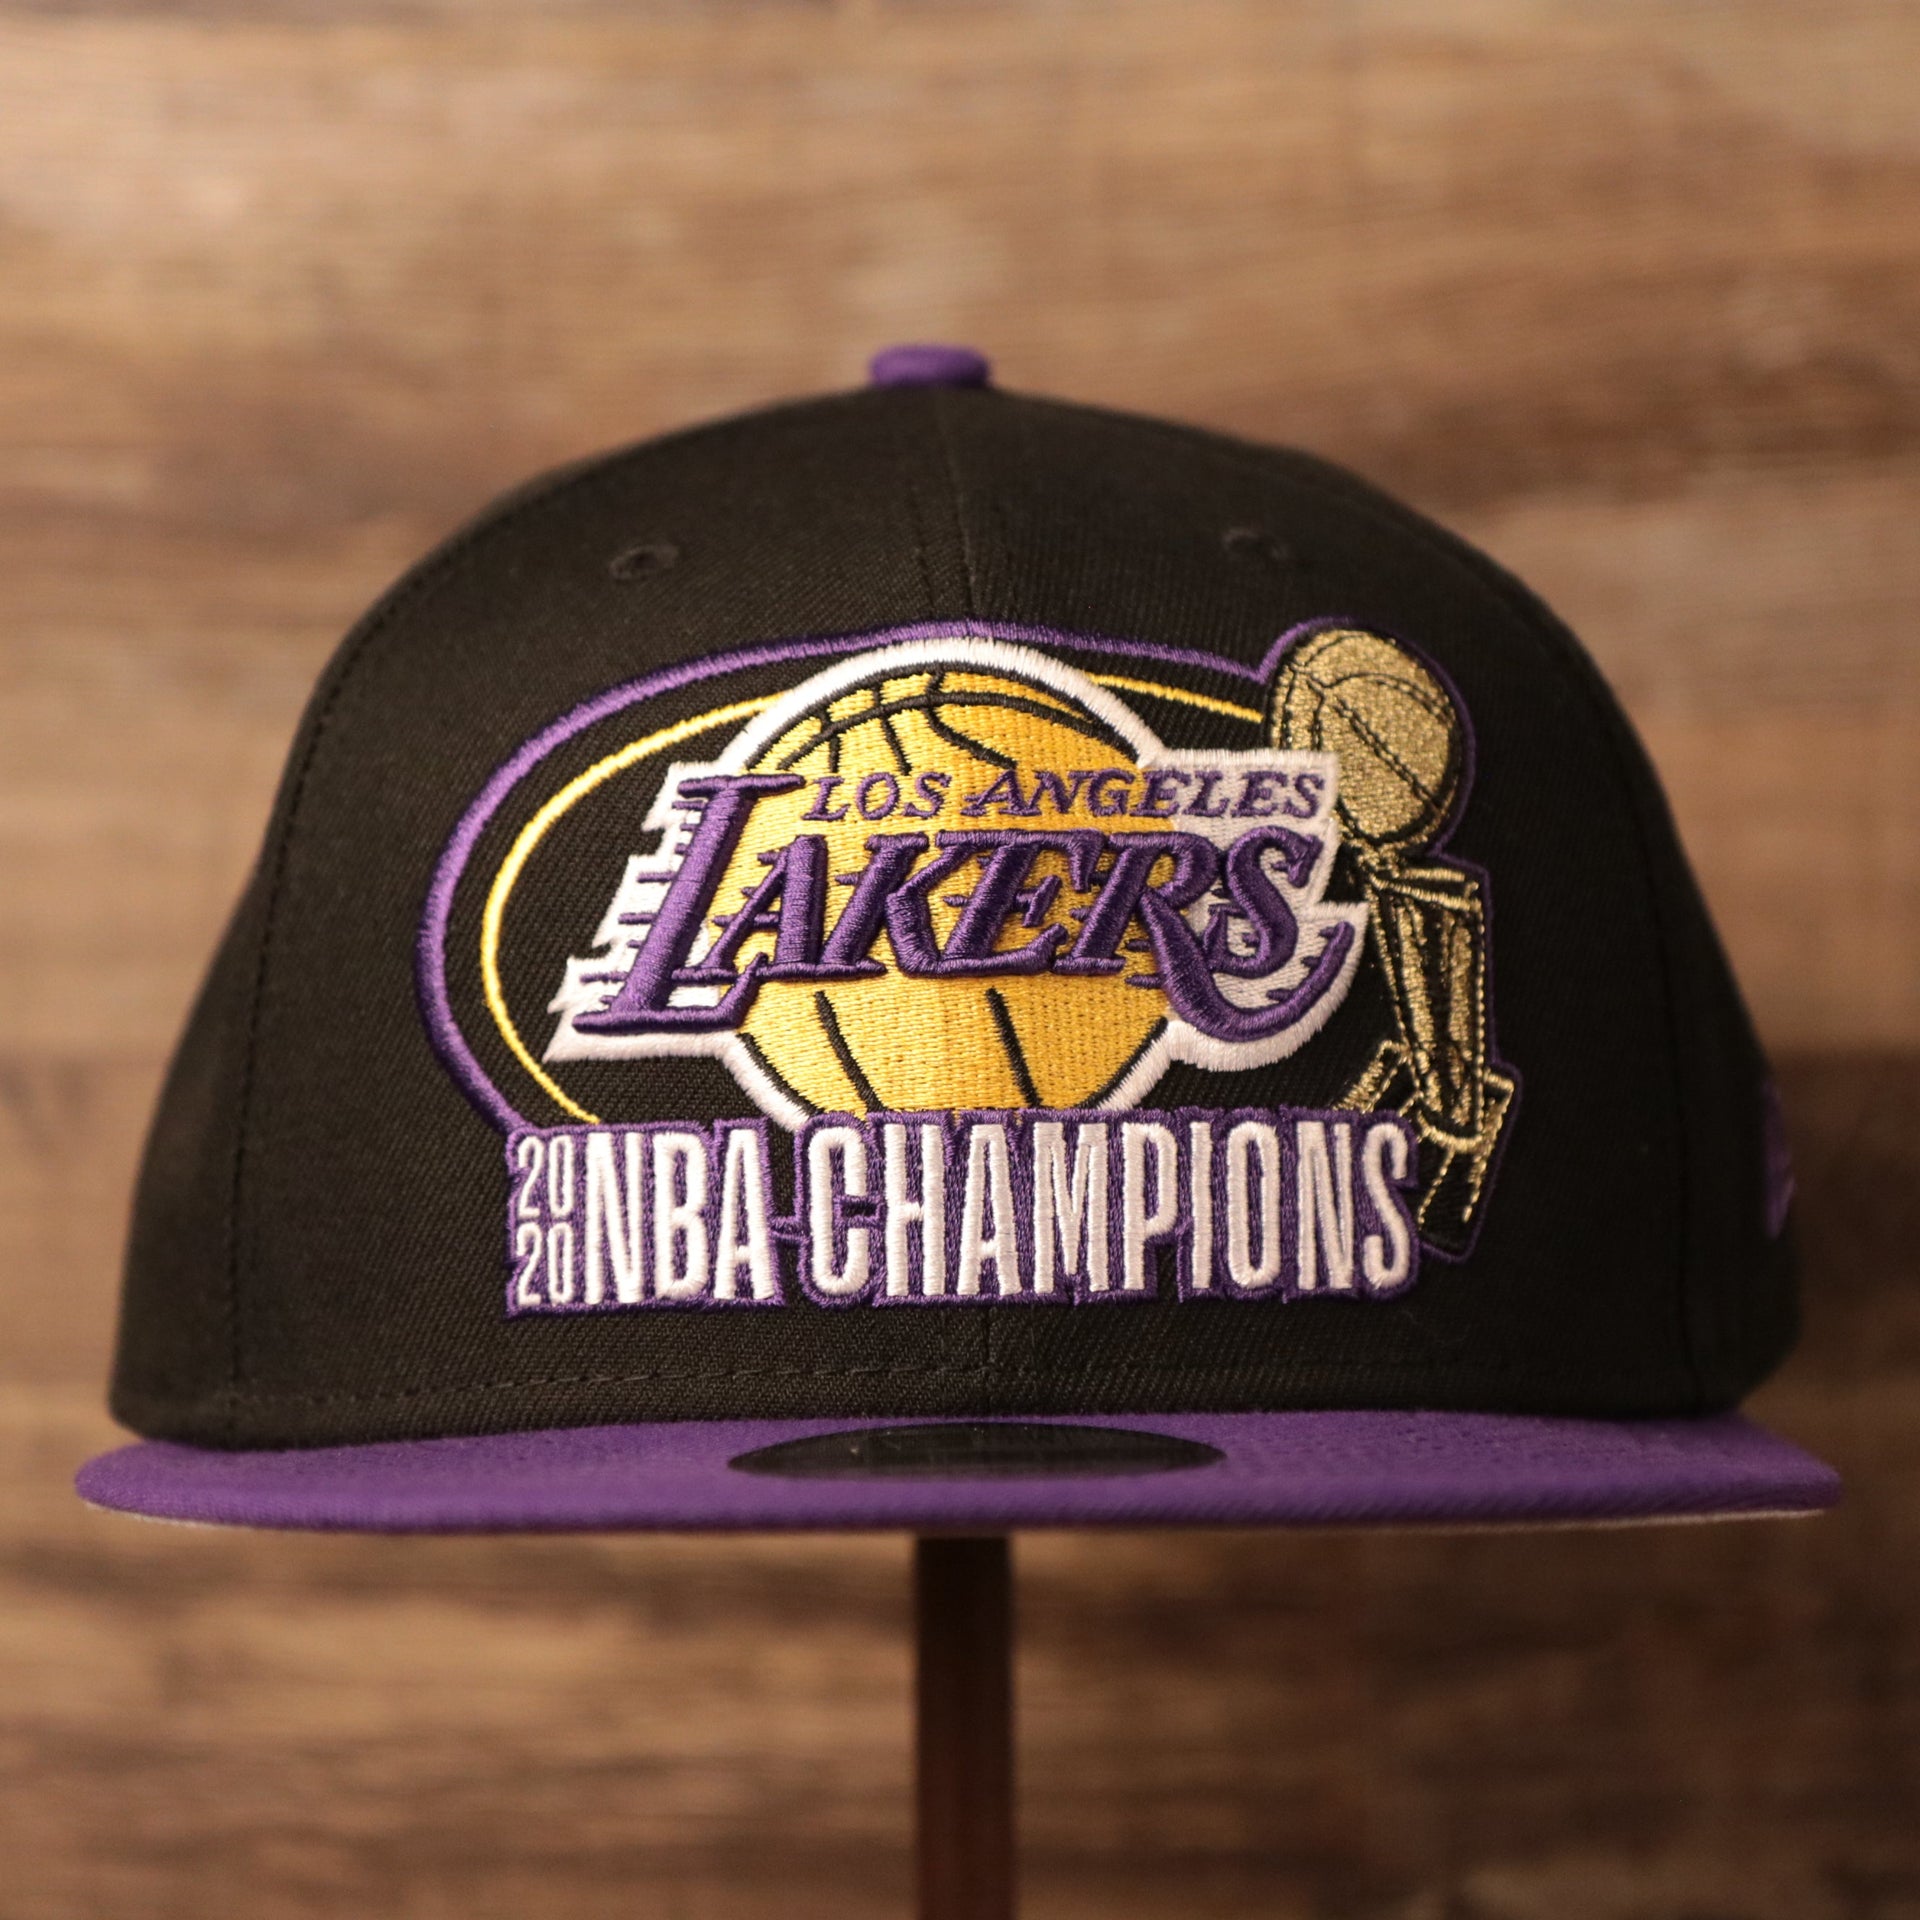 The black/purple Lakers 2020 champion 9Fifty hat by New Era.